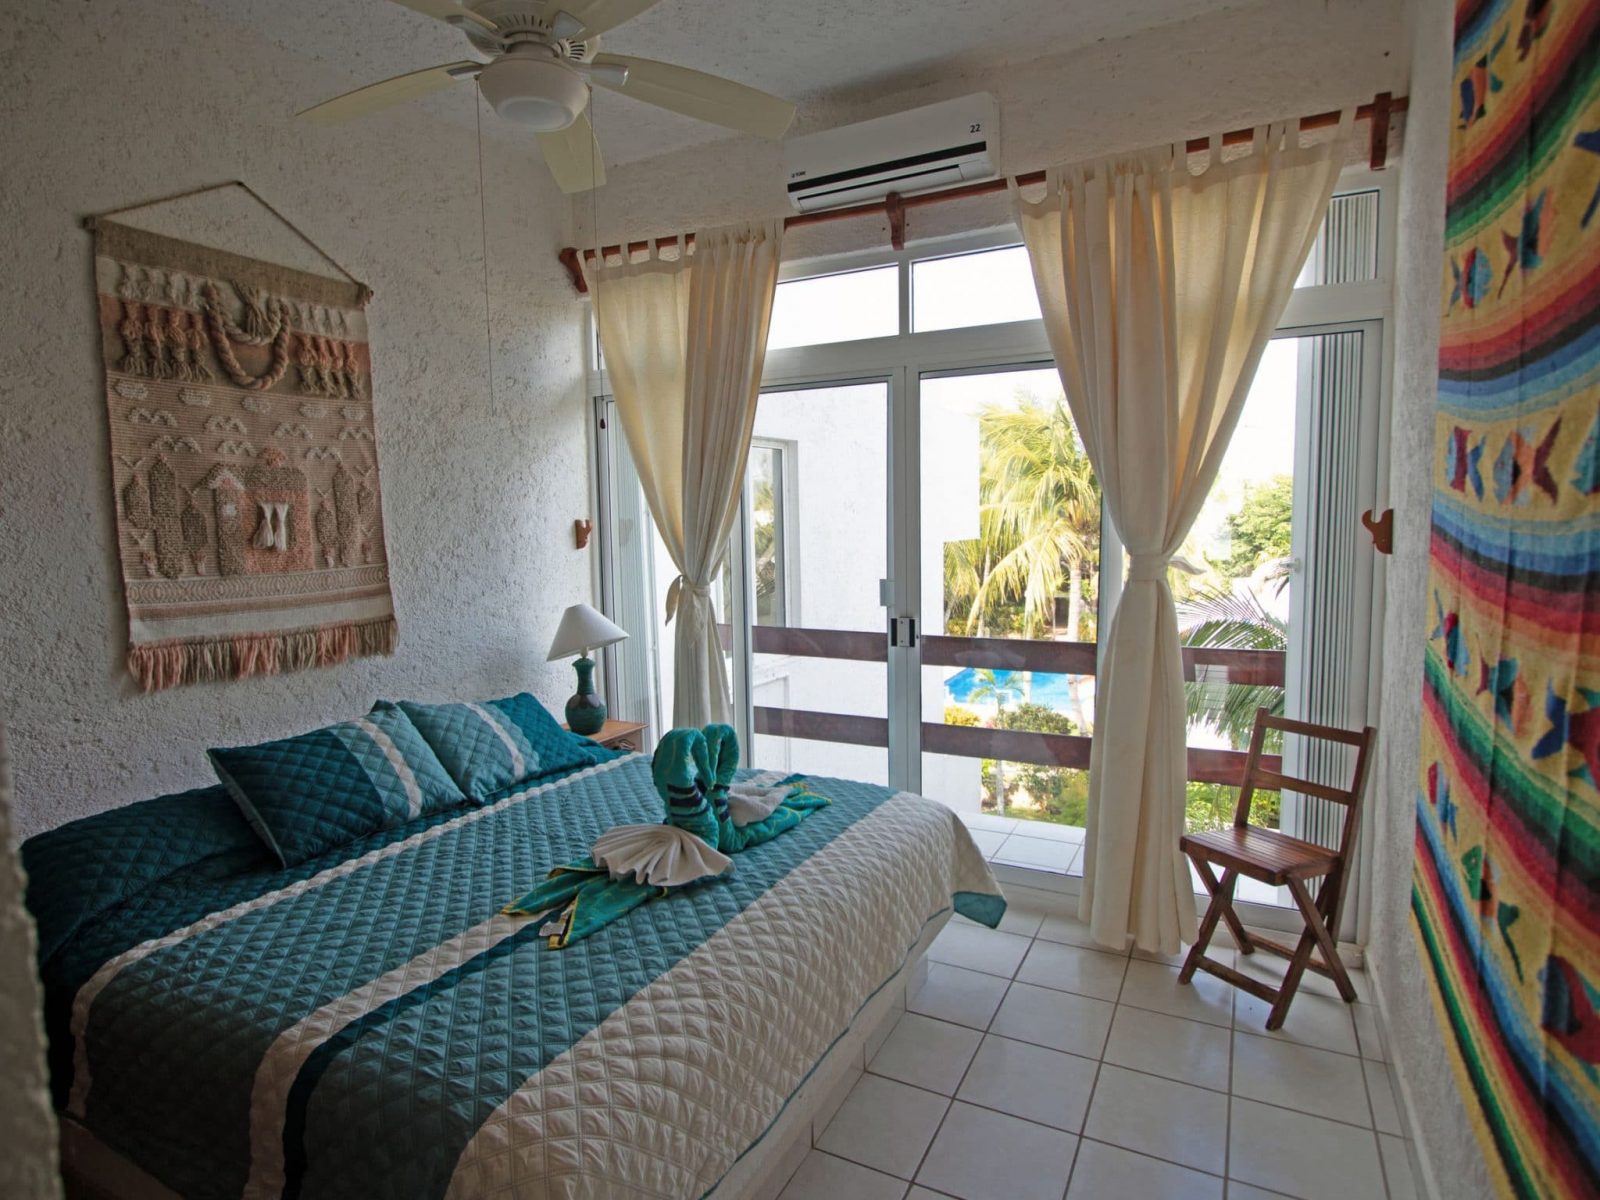 Tranquility, La Sirena #8, The 2nd bedroom has great garden views